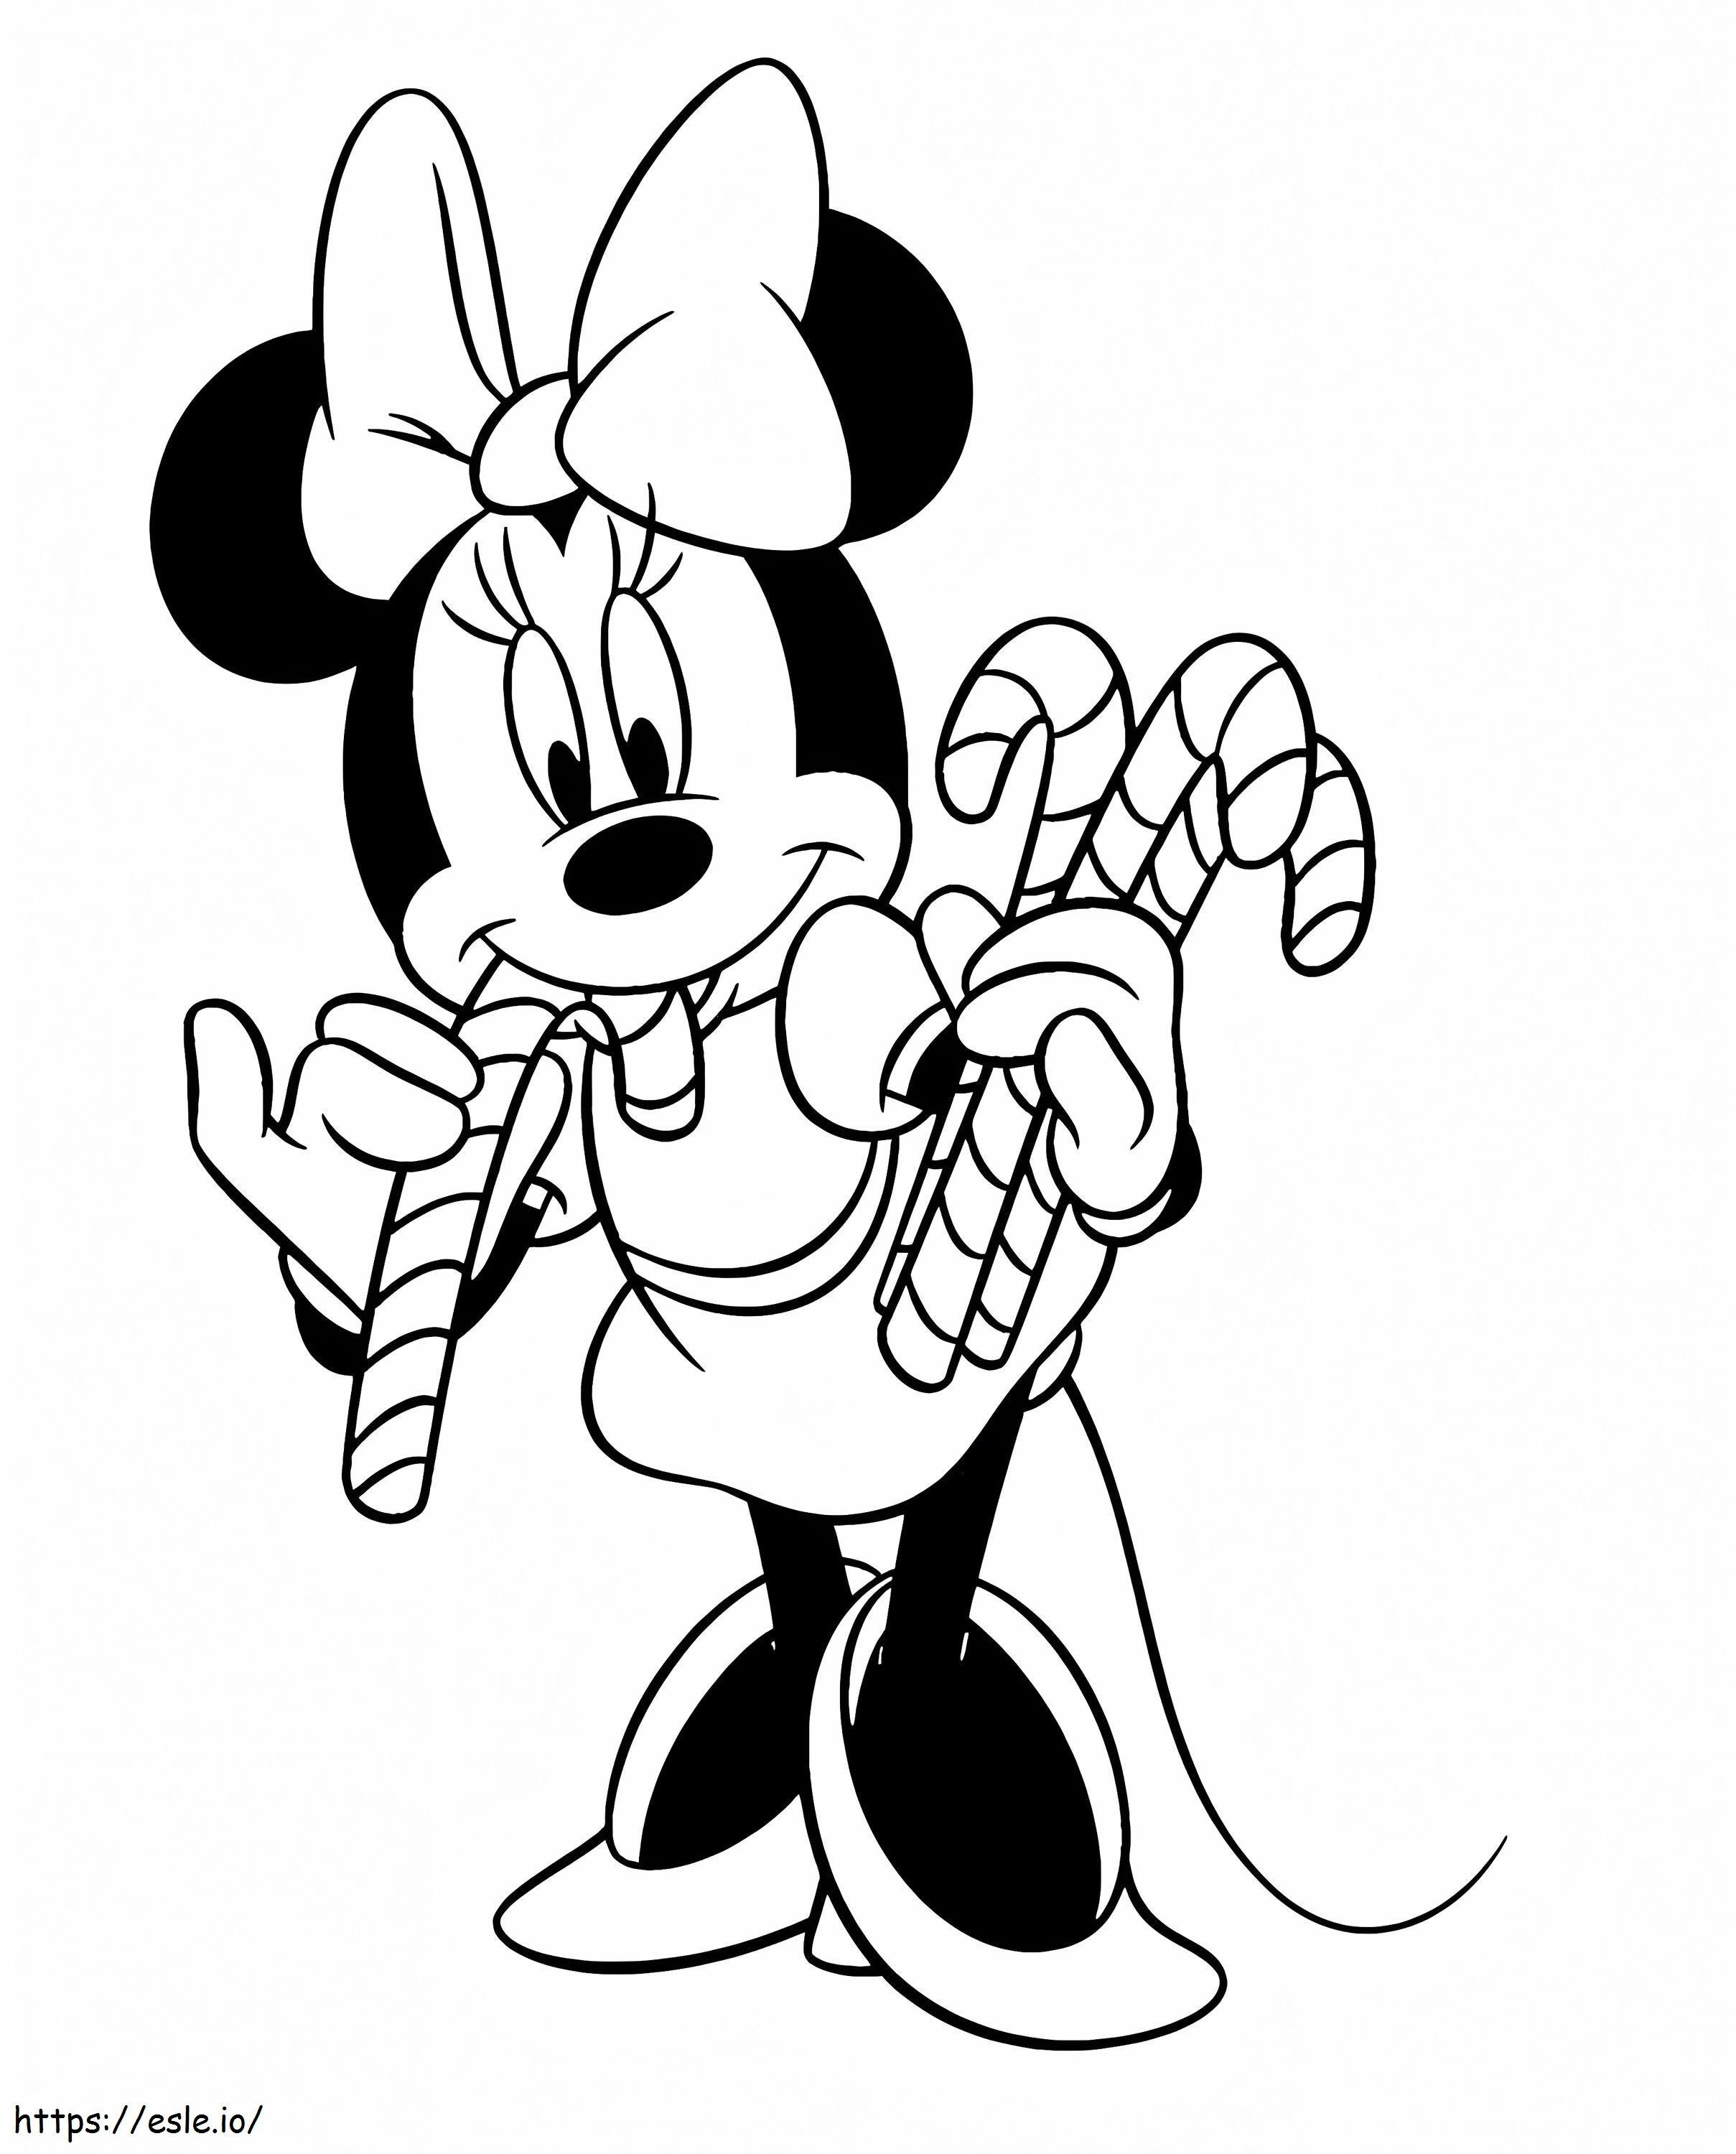 Minnie Mouse With Candy Canes coloring page